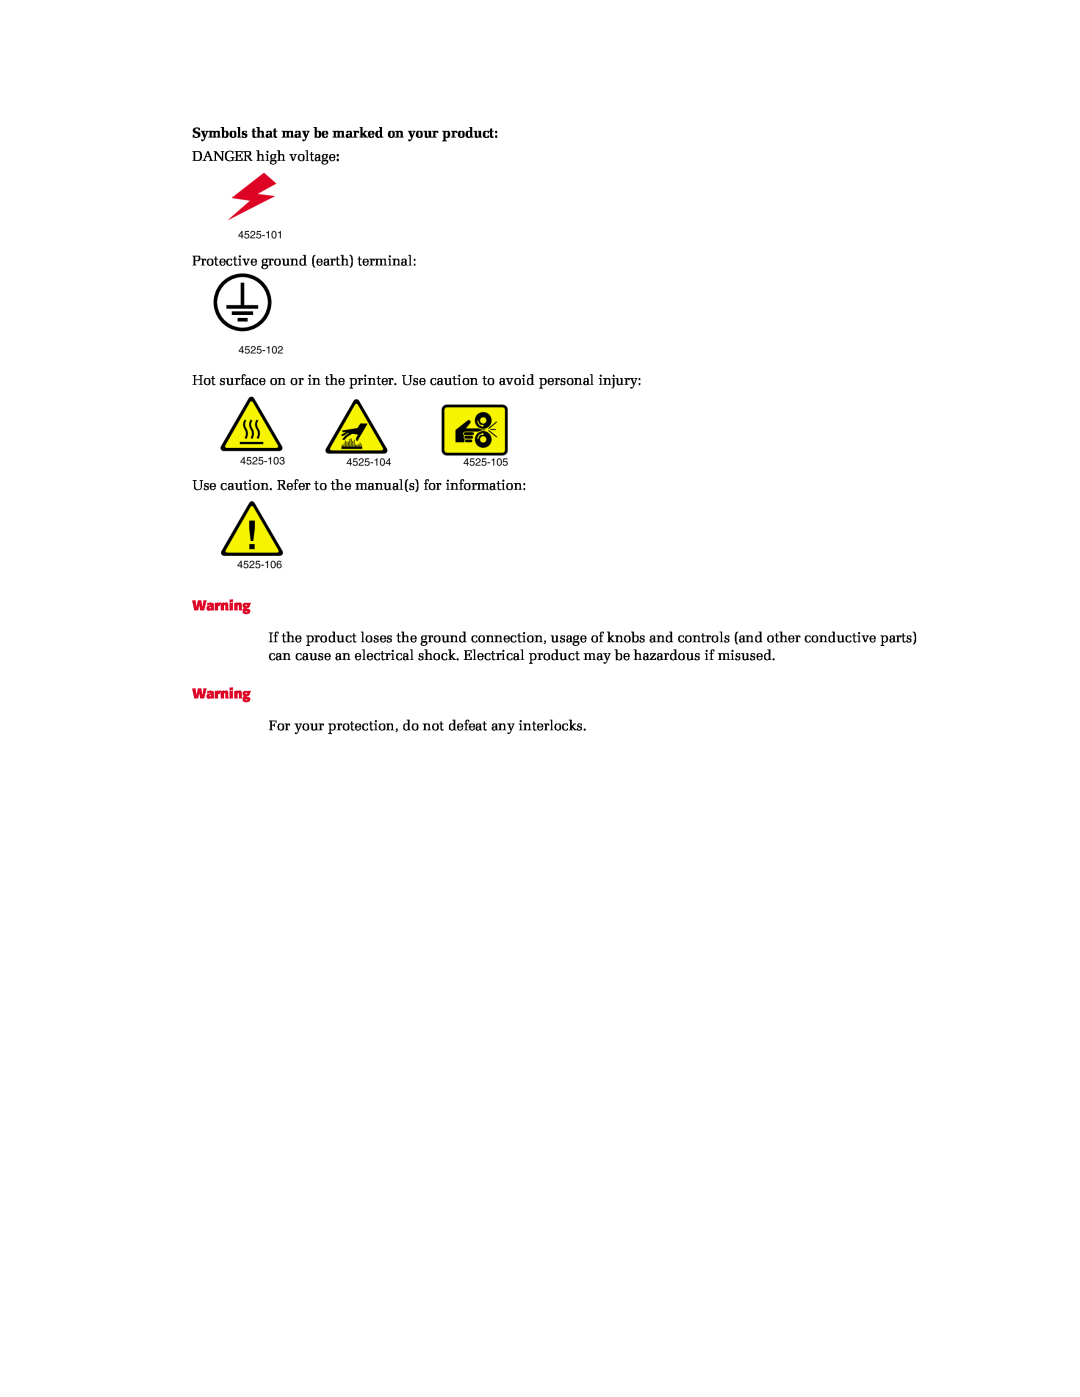 Xerox N4525 manual Symbols that may be marked on your product 